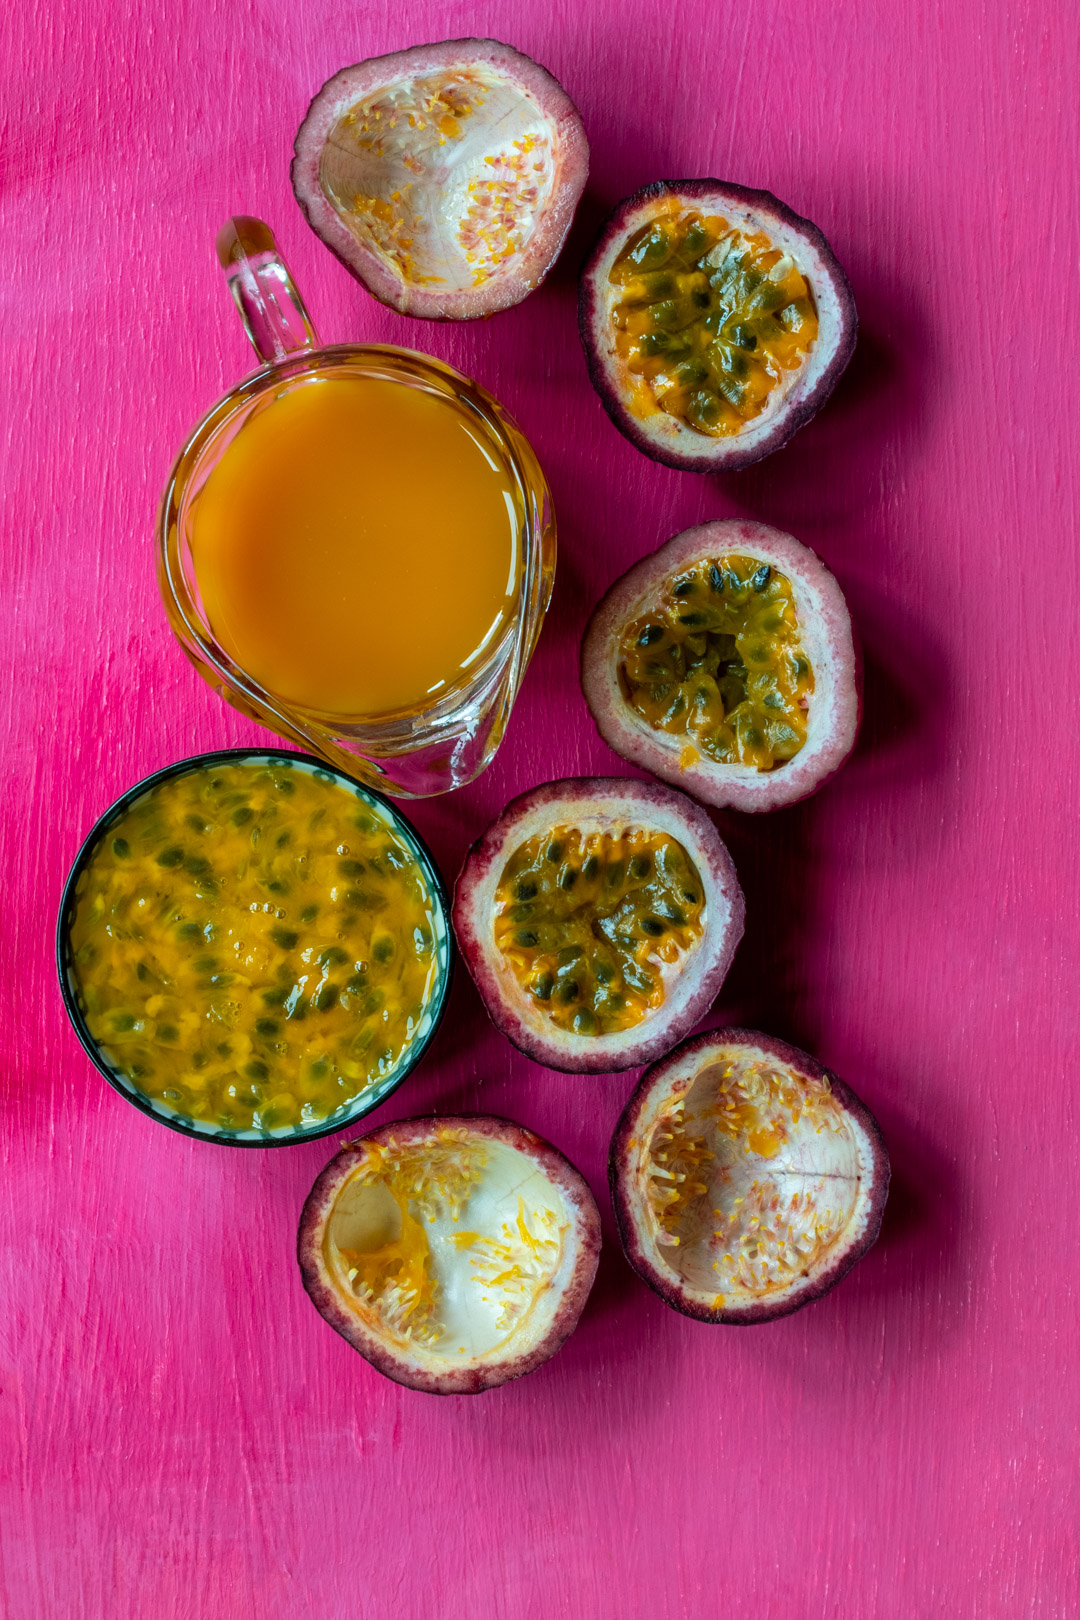 passionfruit syrup with fresh passionfruit for the esperança